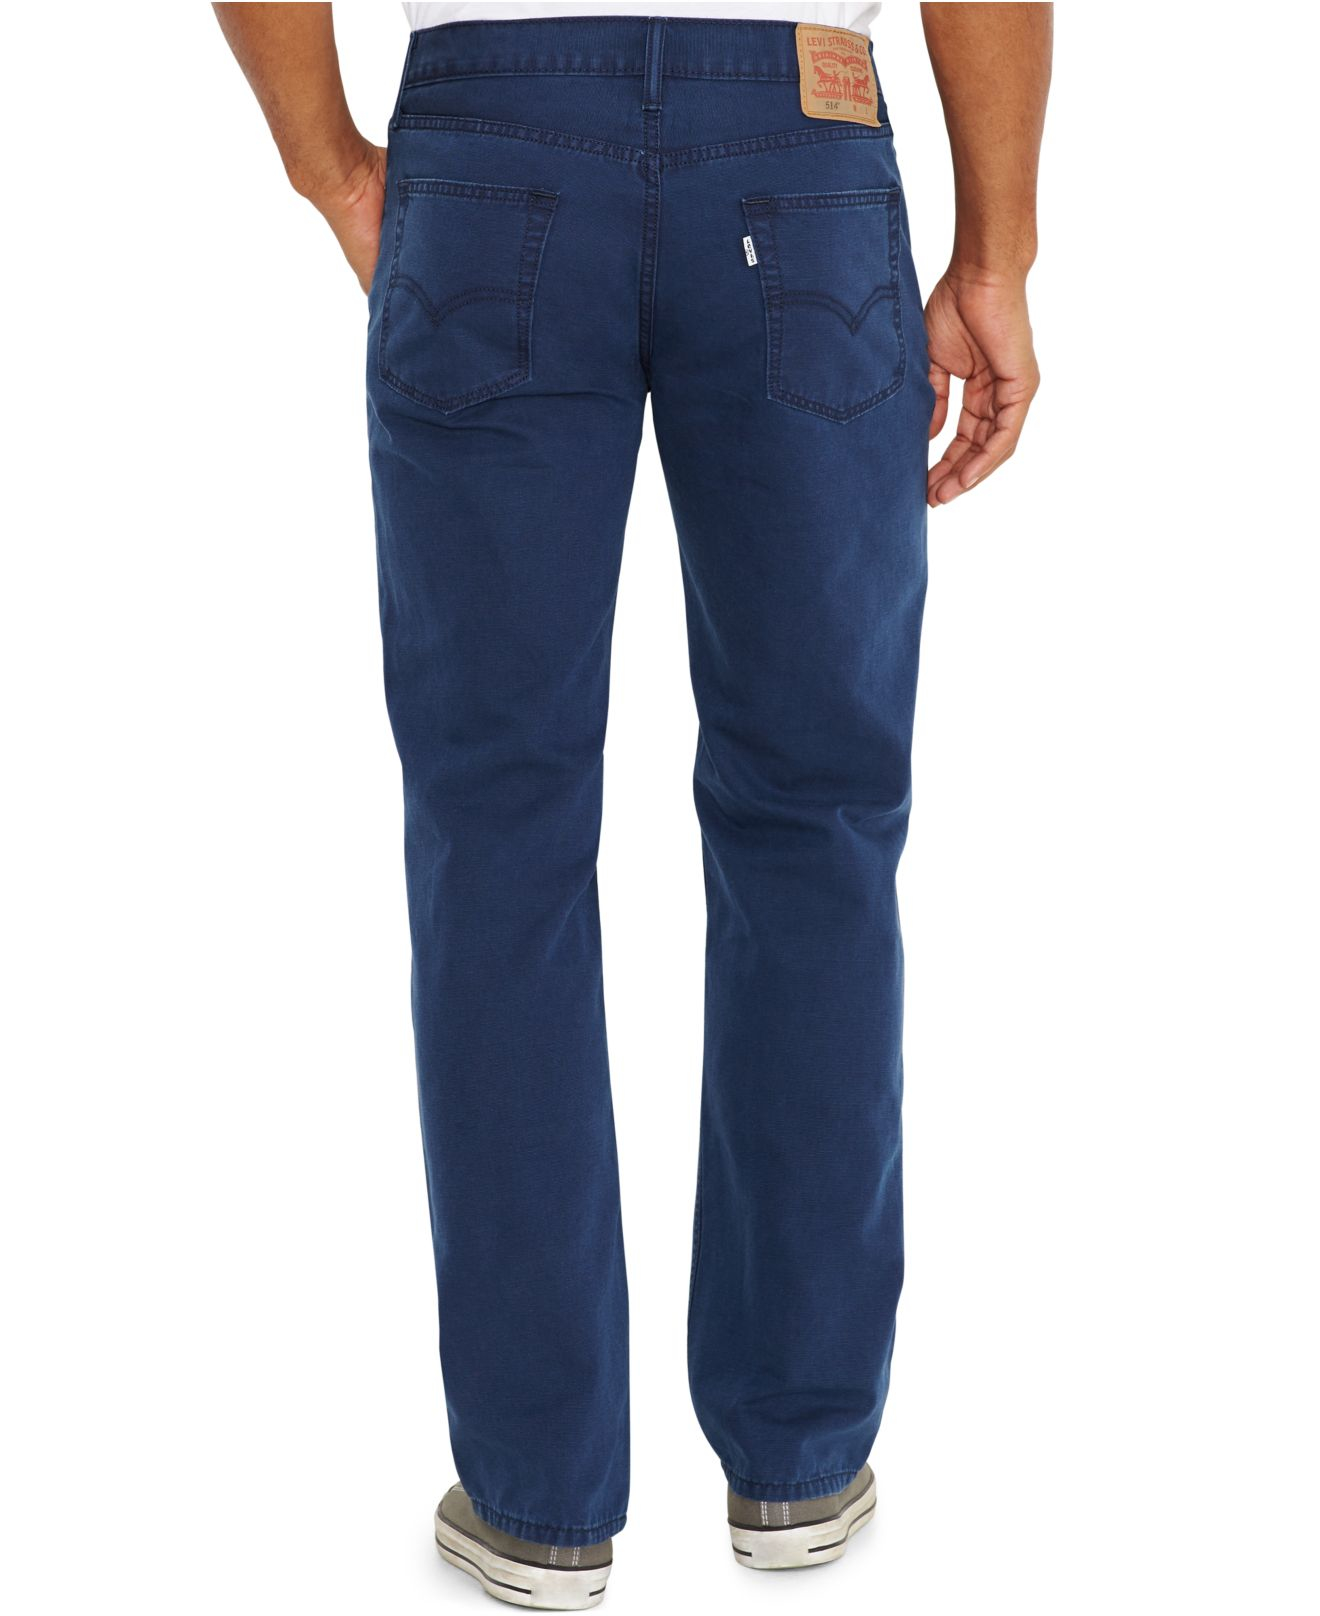 Levi's 514 Straight Fit Padox Canvas Twill Pants in Blue for Men - Lyst